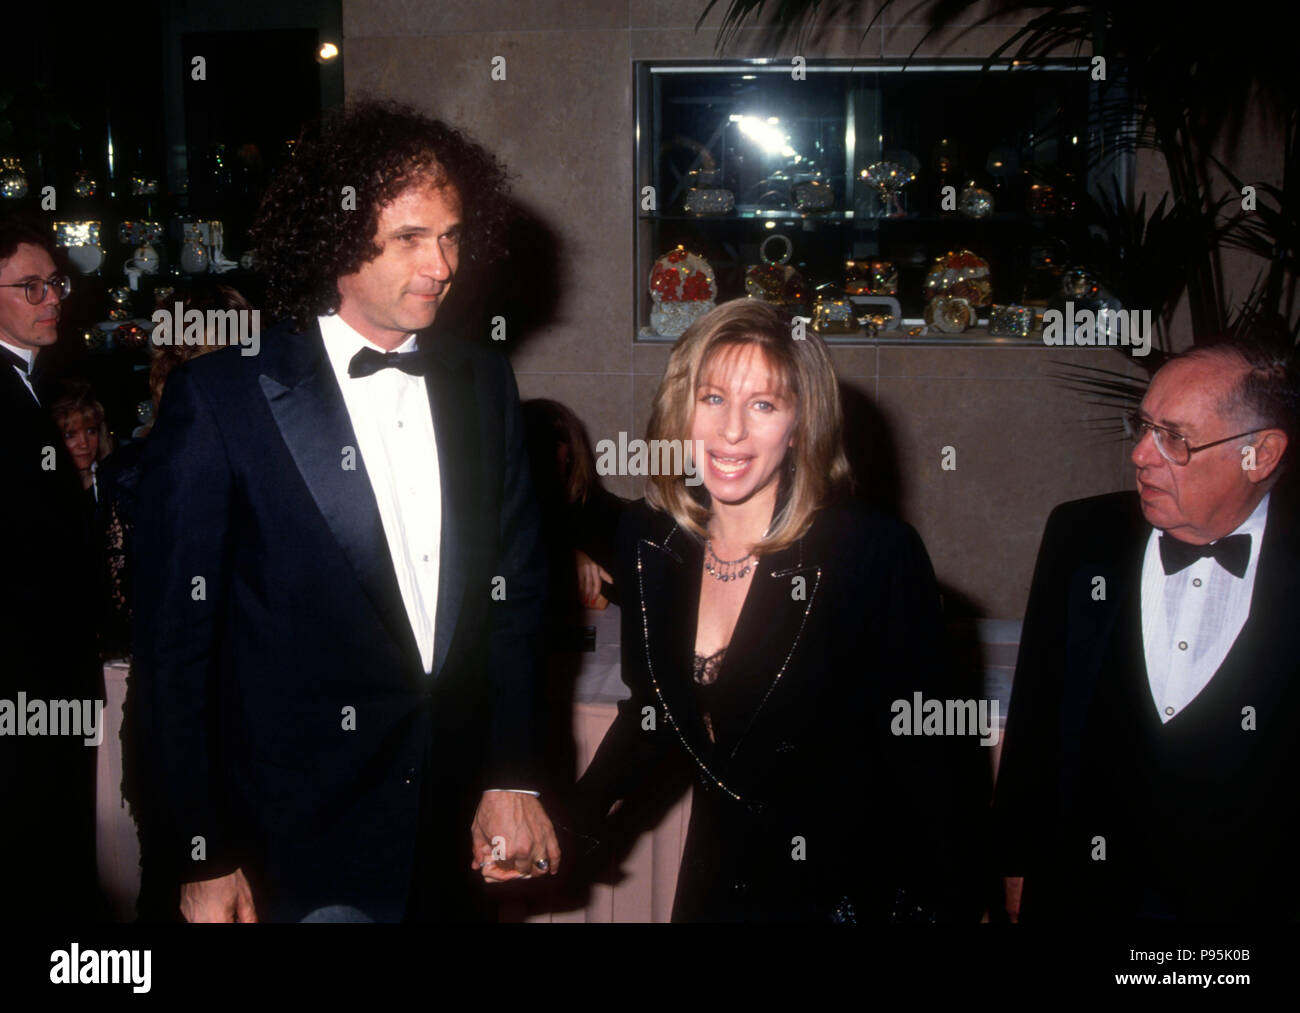 BEVERLY HILLS, CA - MARCH 14: Composer Richard Baskin and singer/director Barbra Streisand attend the 44th Annual Directors Guild of America Awards on March 14, 1992 at the Beverly Hilton Hotel in Beverly Hills, California. Photo by Barry King/Alamy Stock Photo Stock Photo